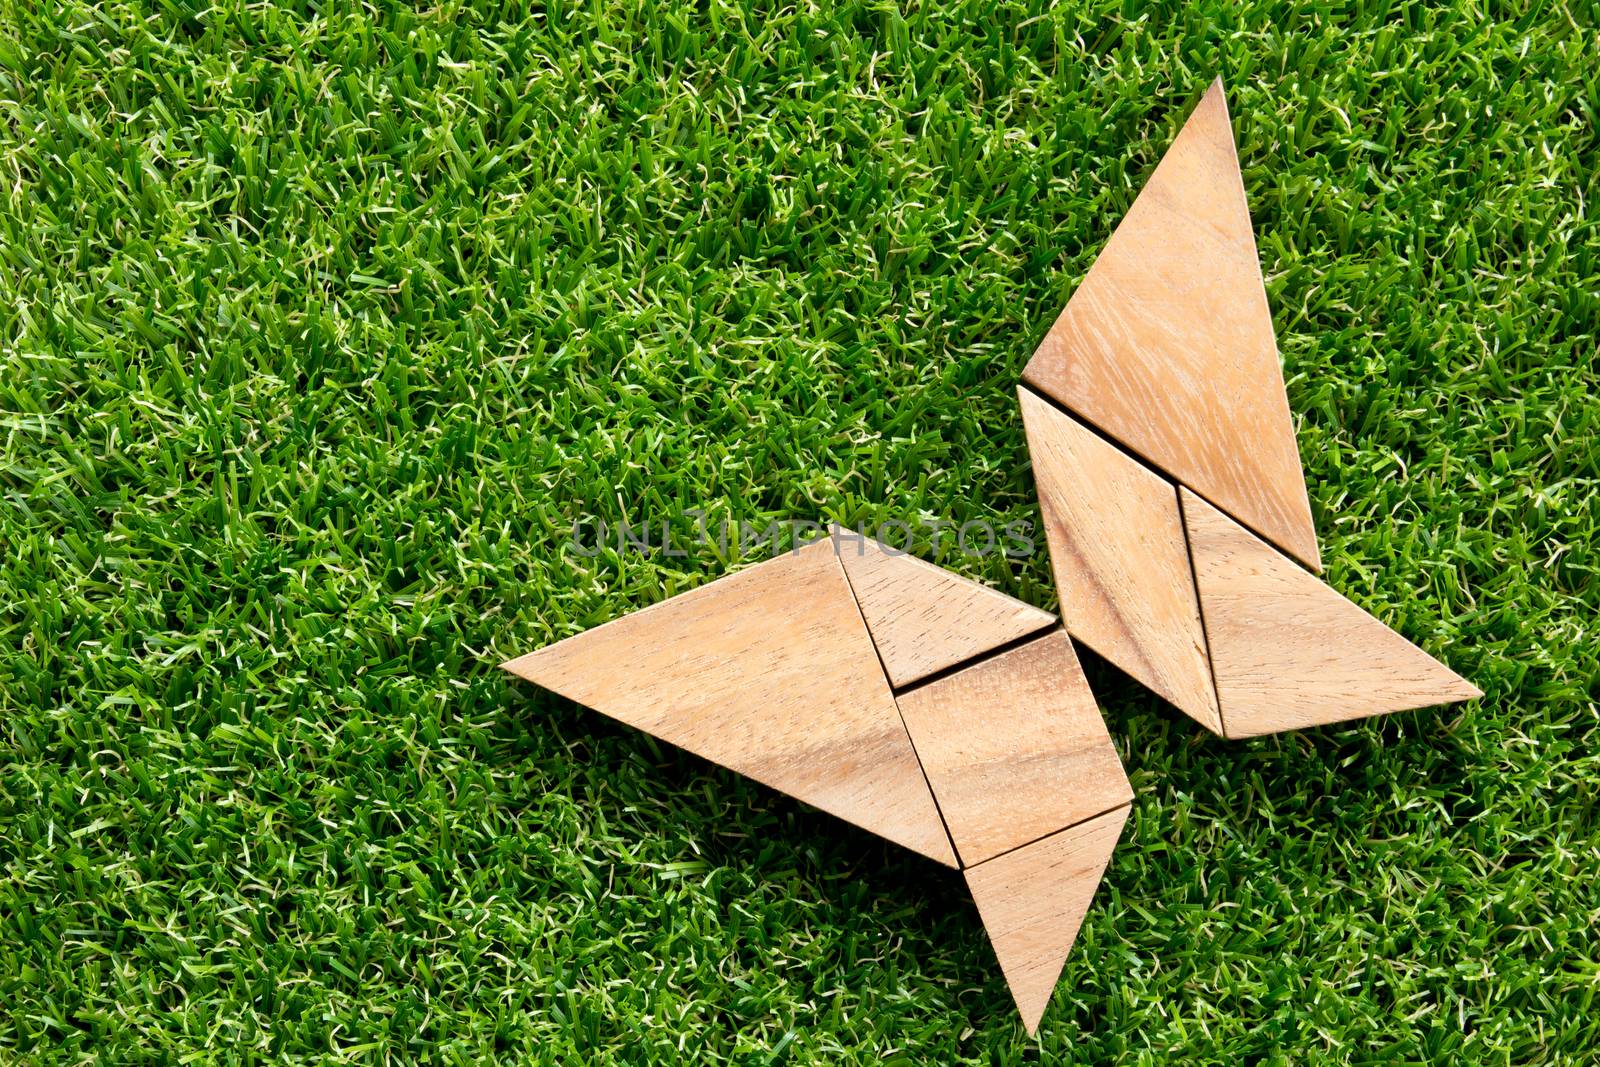 Wooden tangram puzzle in flying butterfly shape on green grass b by Hengpattanapong